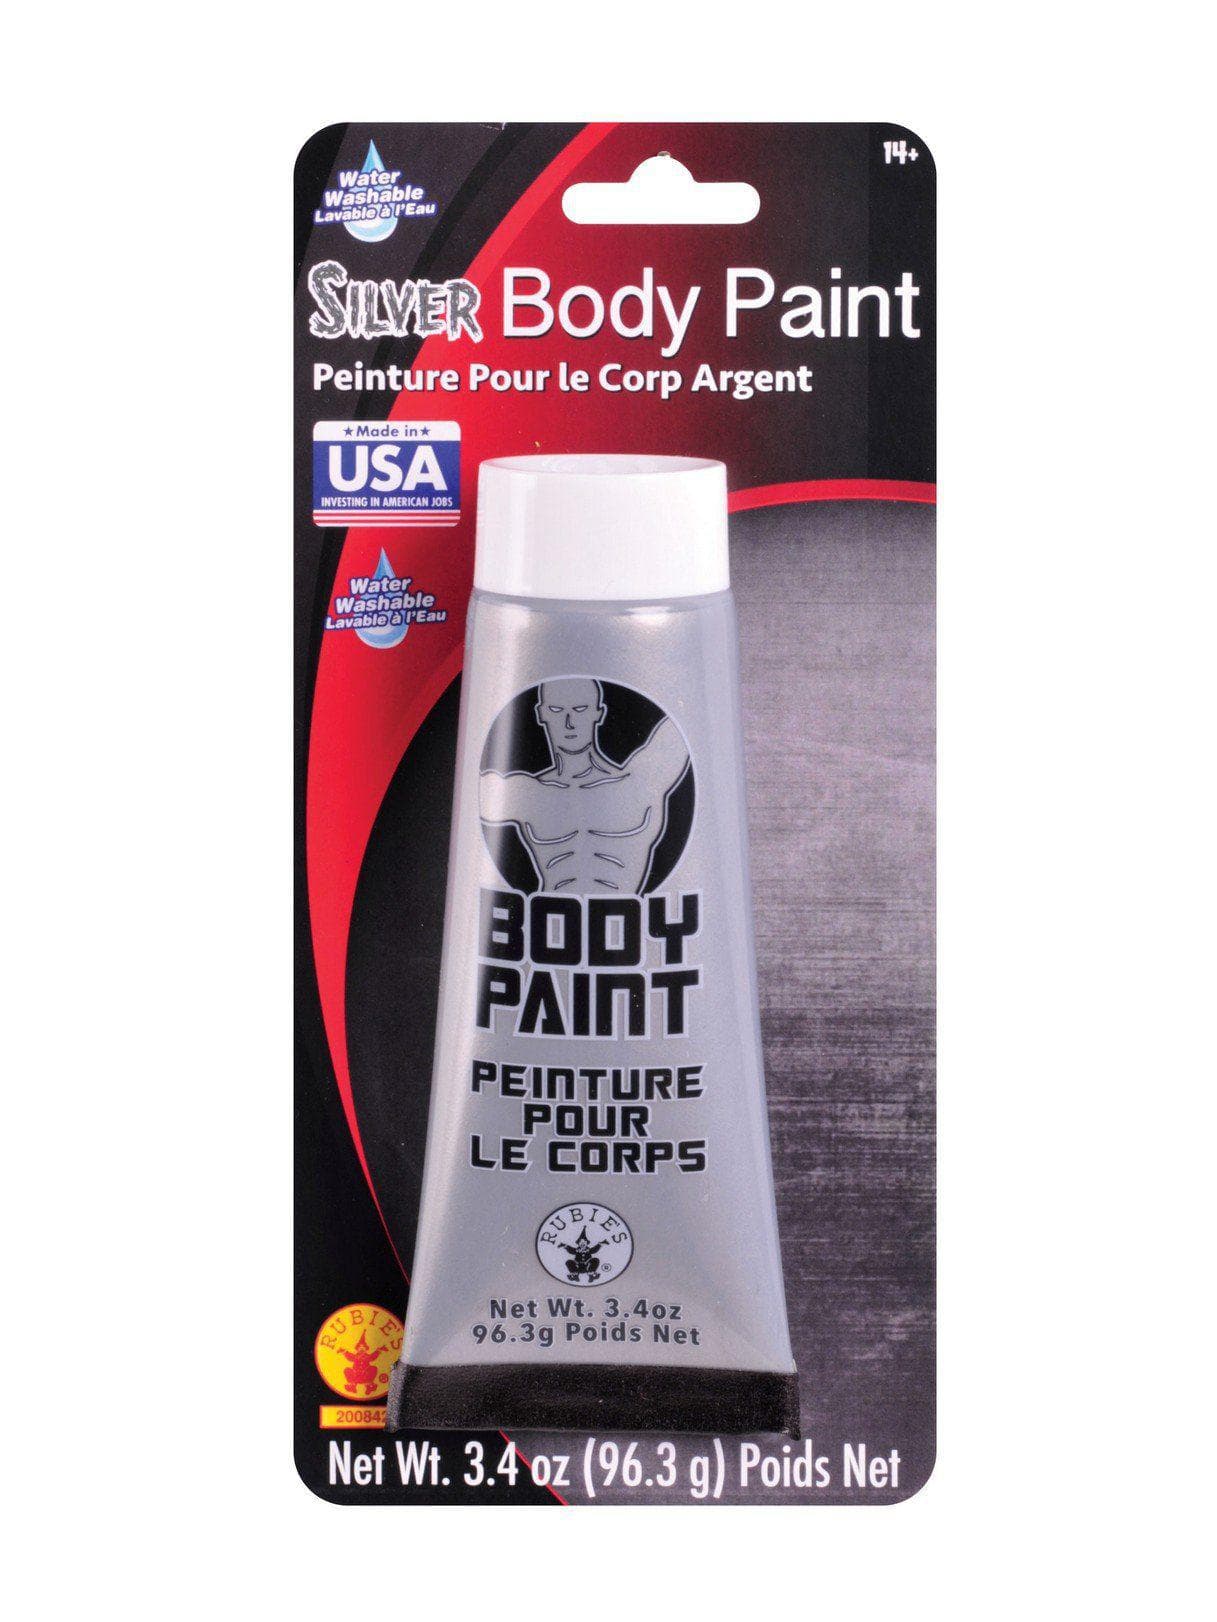 Silver Body Paint - costumes.com